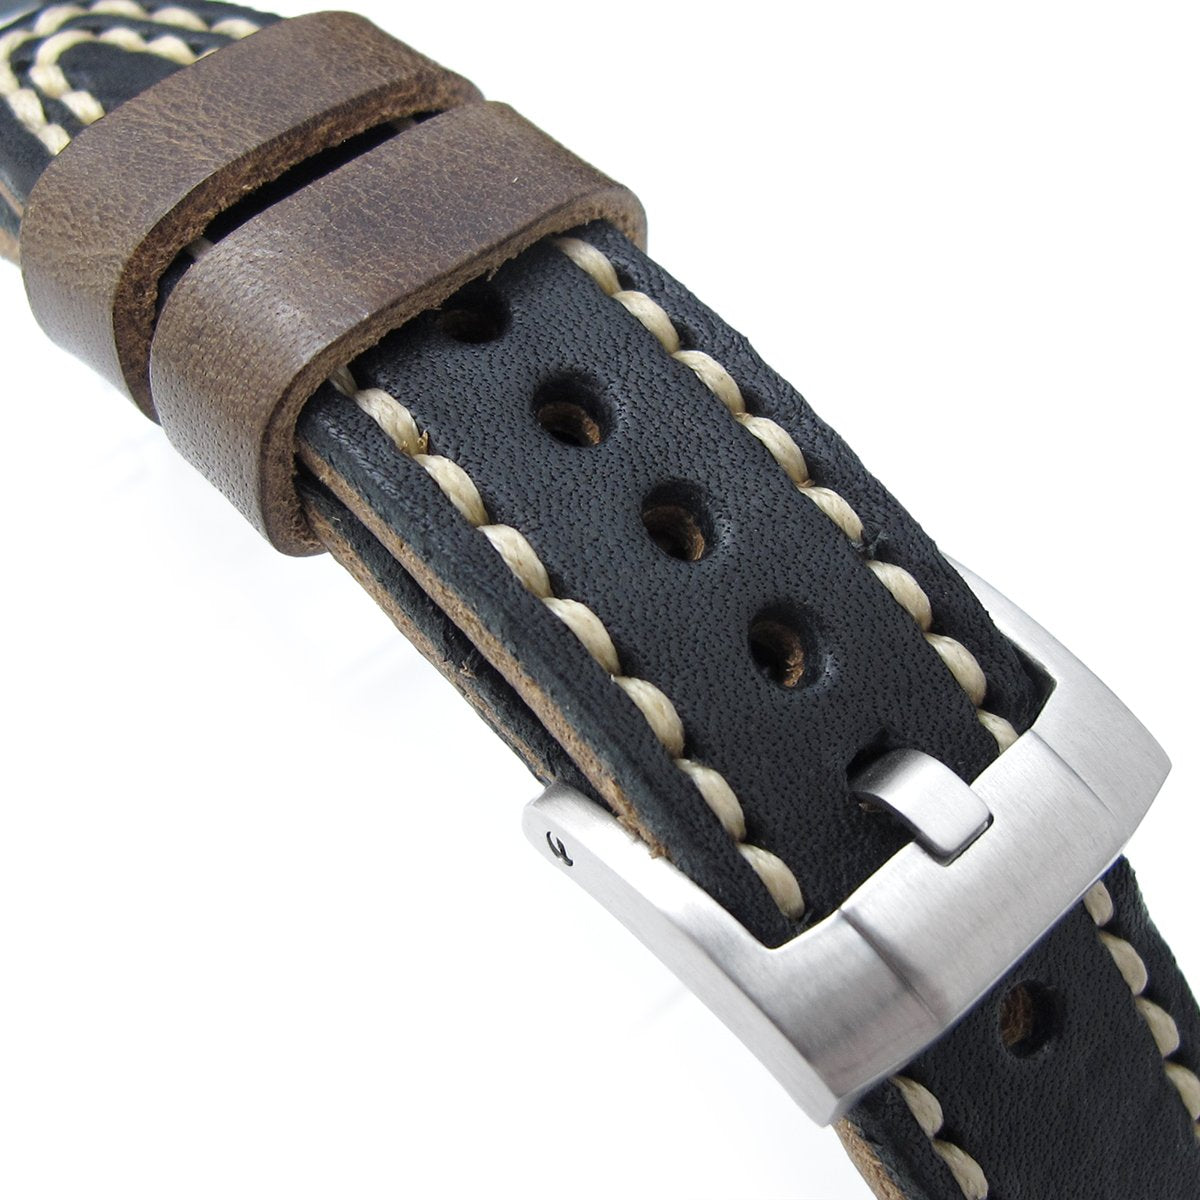 MiLTAT 21mm, 22mm Genuine Olive Brown Distressed Leather Watch Strap -  Strapcode